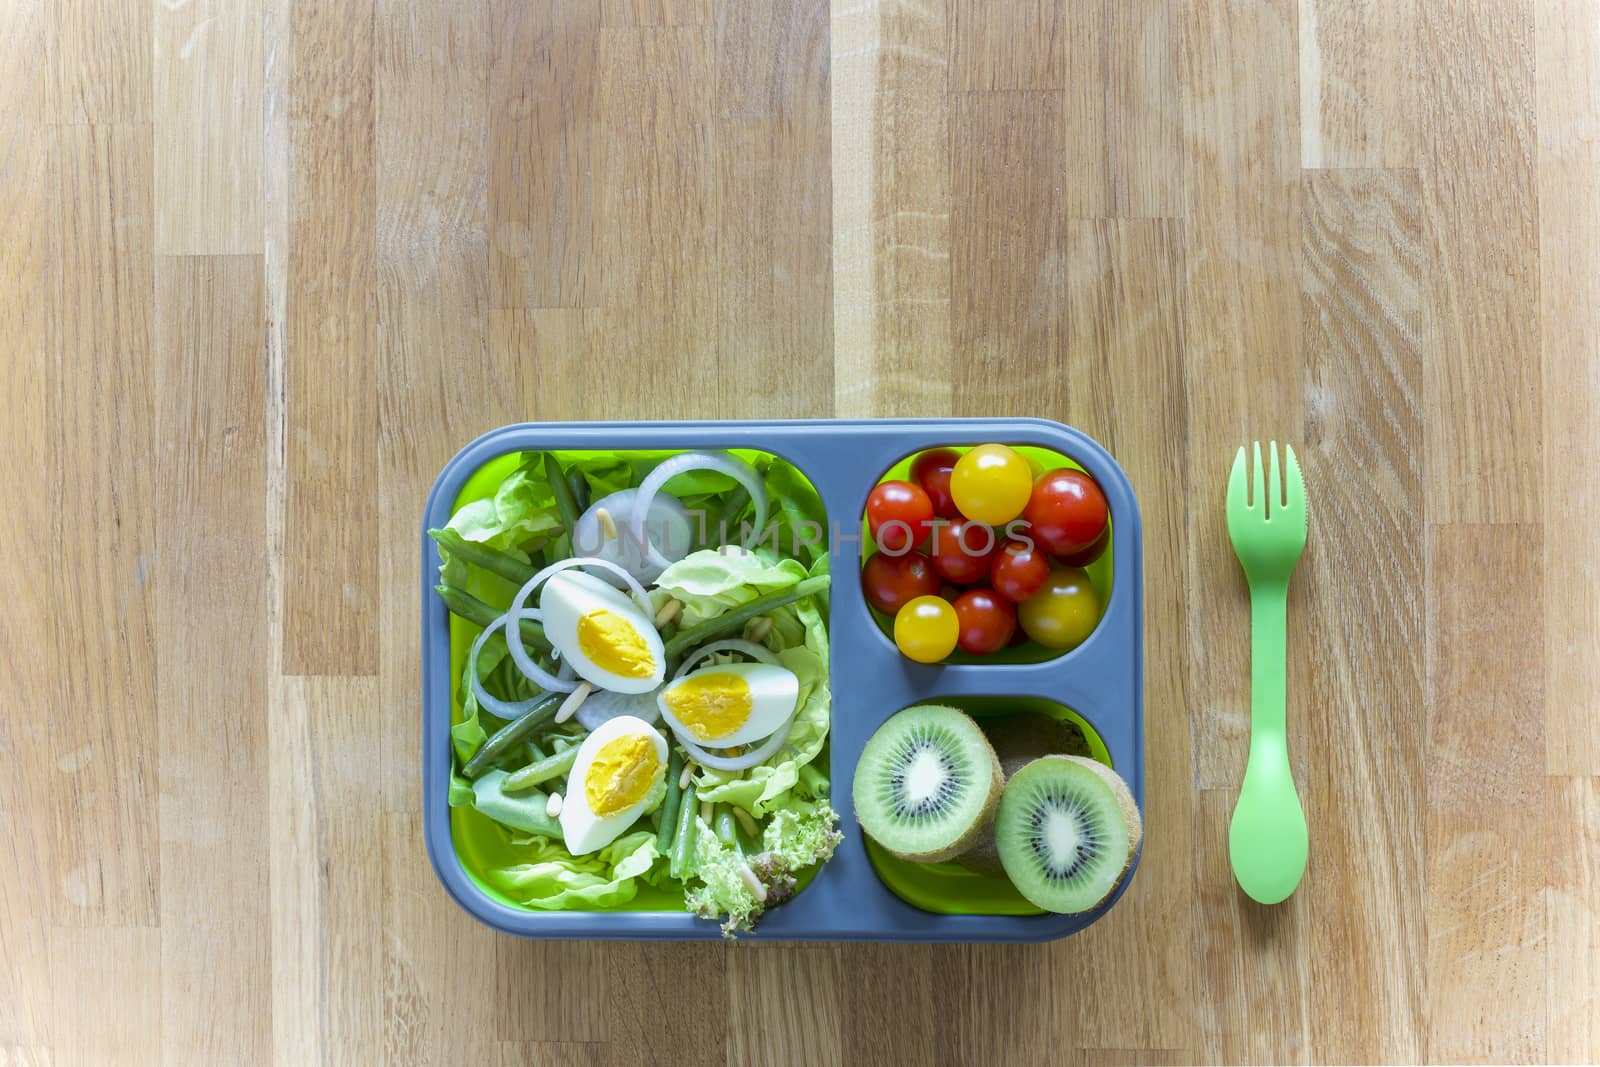 Collapsible silicon lunch box with food (green salads, eggs, tomatoes, kiwi) on wooden table